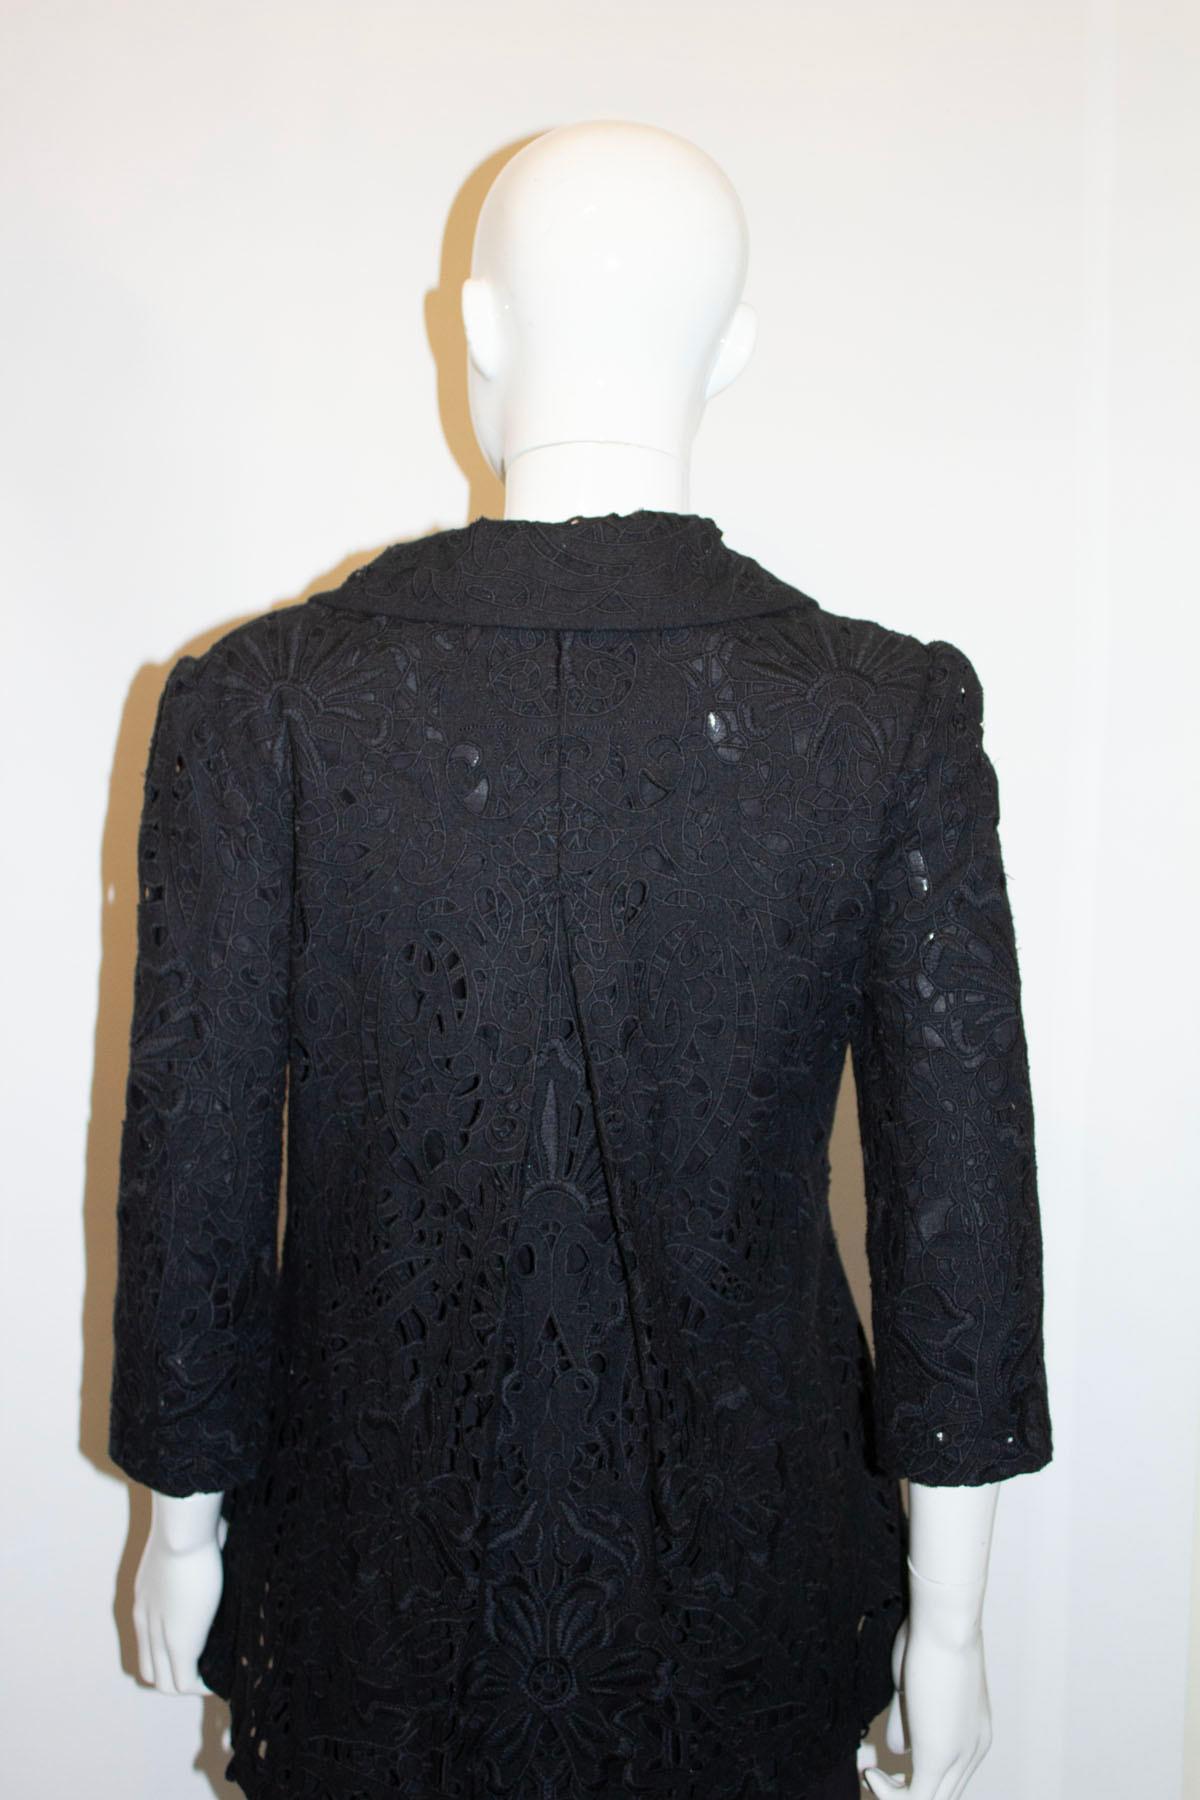 Chloe Black Broderie Anglaise Jacket In Good Condition For Sale In London, GB